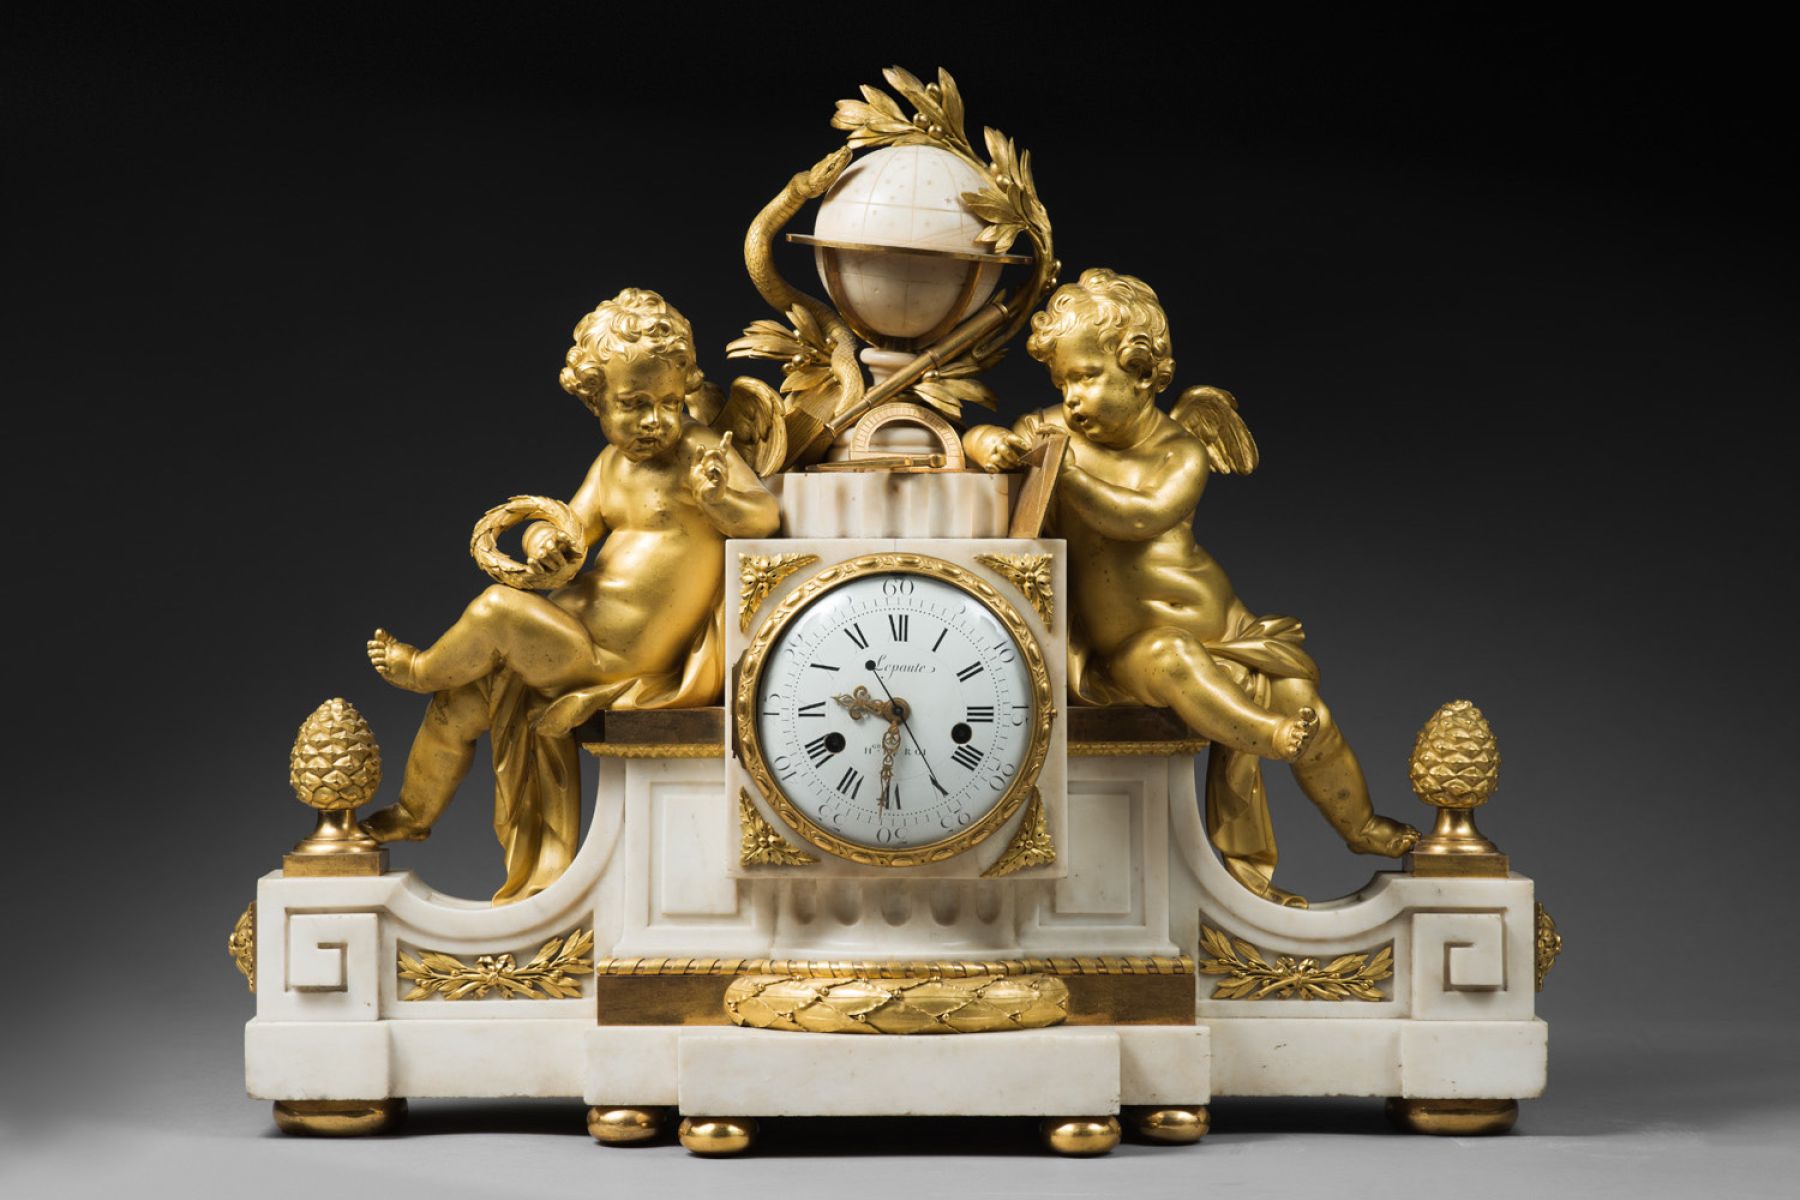 "Eloquence and Astronomy" Transition period clock